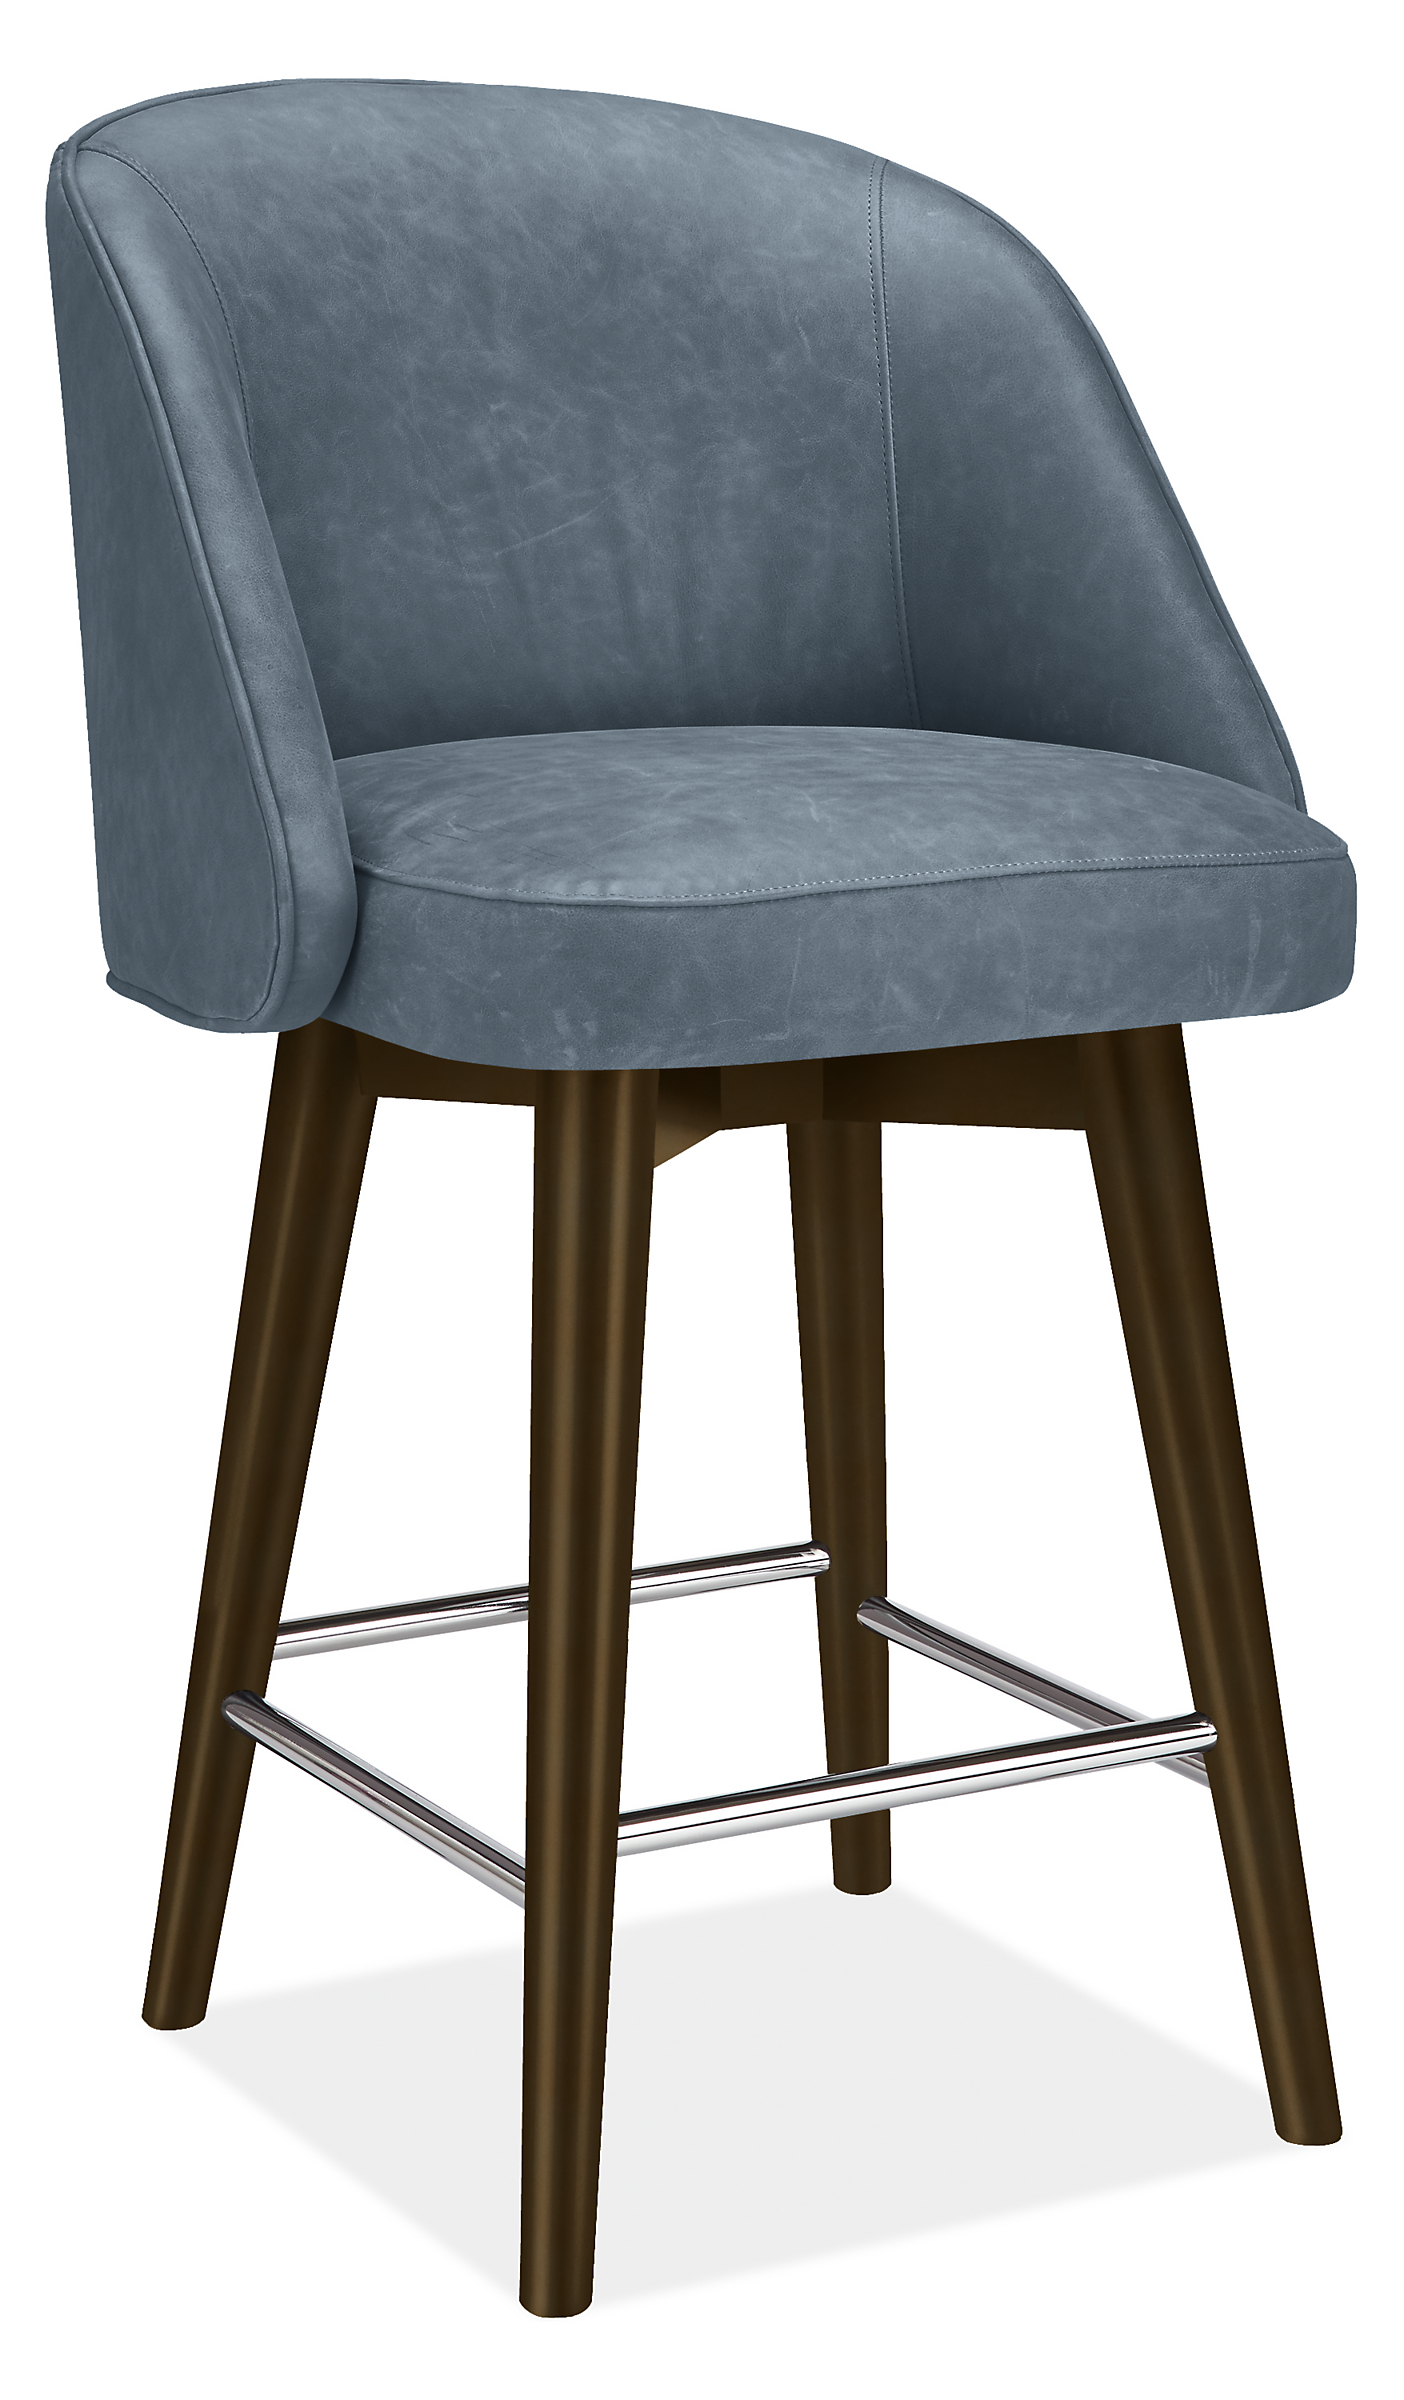 Cora Swivel Counter Stool in Vento Cadet Leather with Charcoal Legs